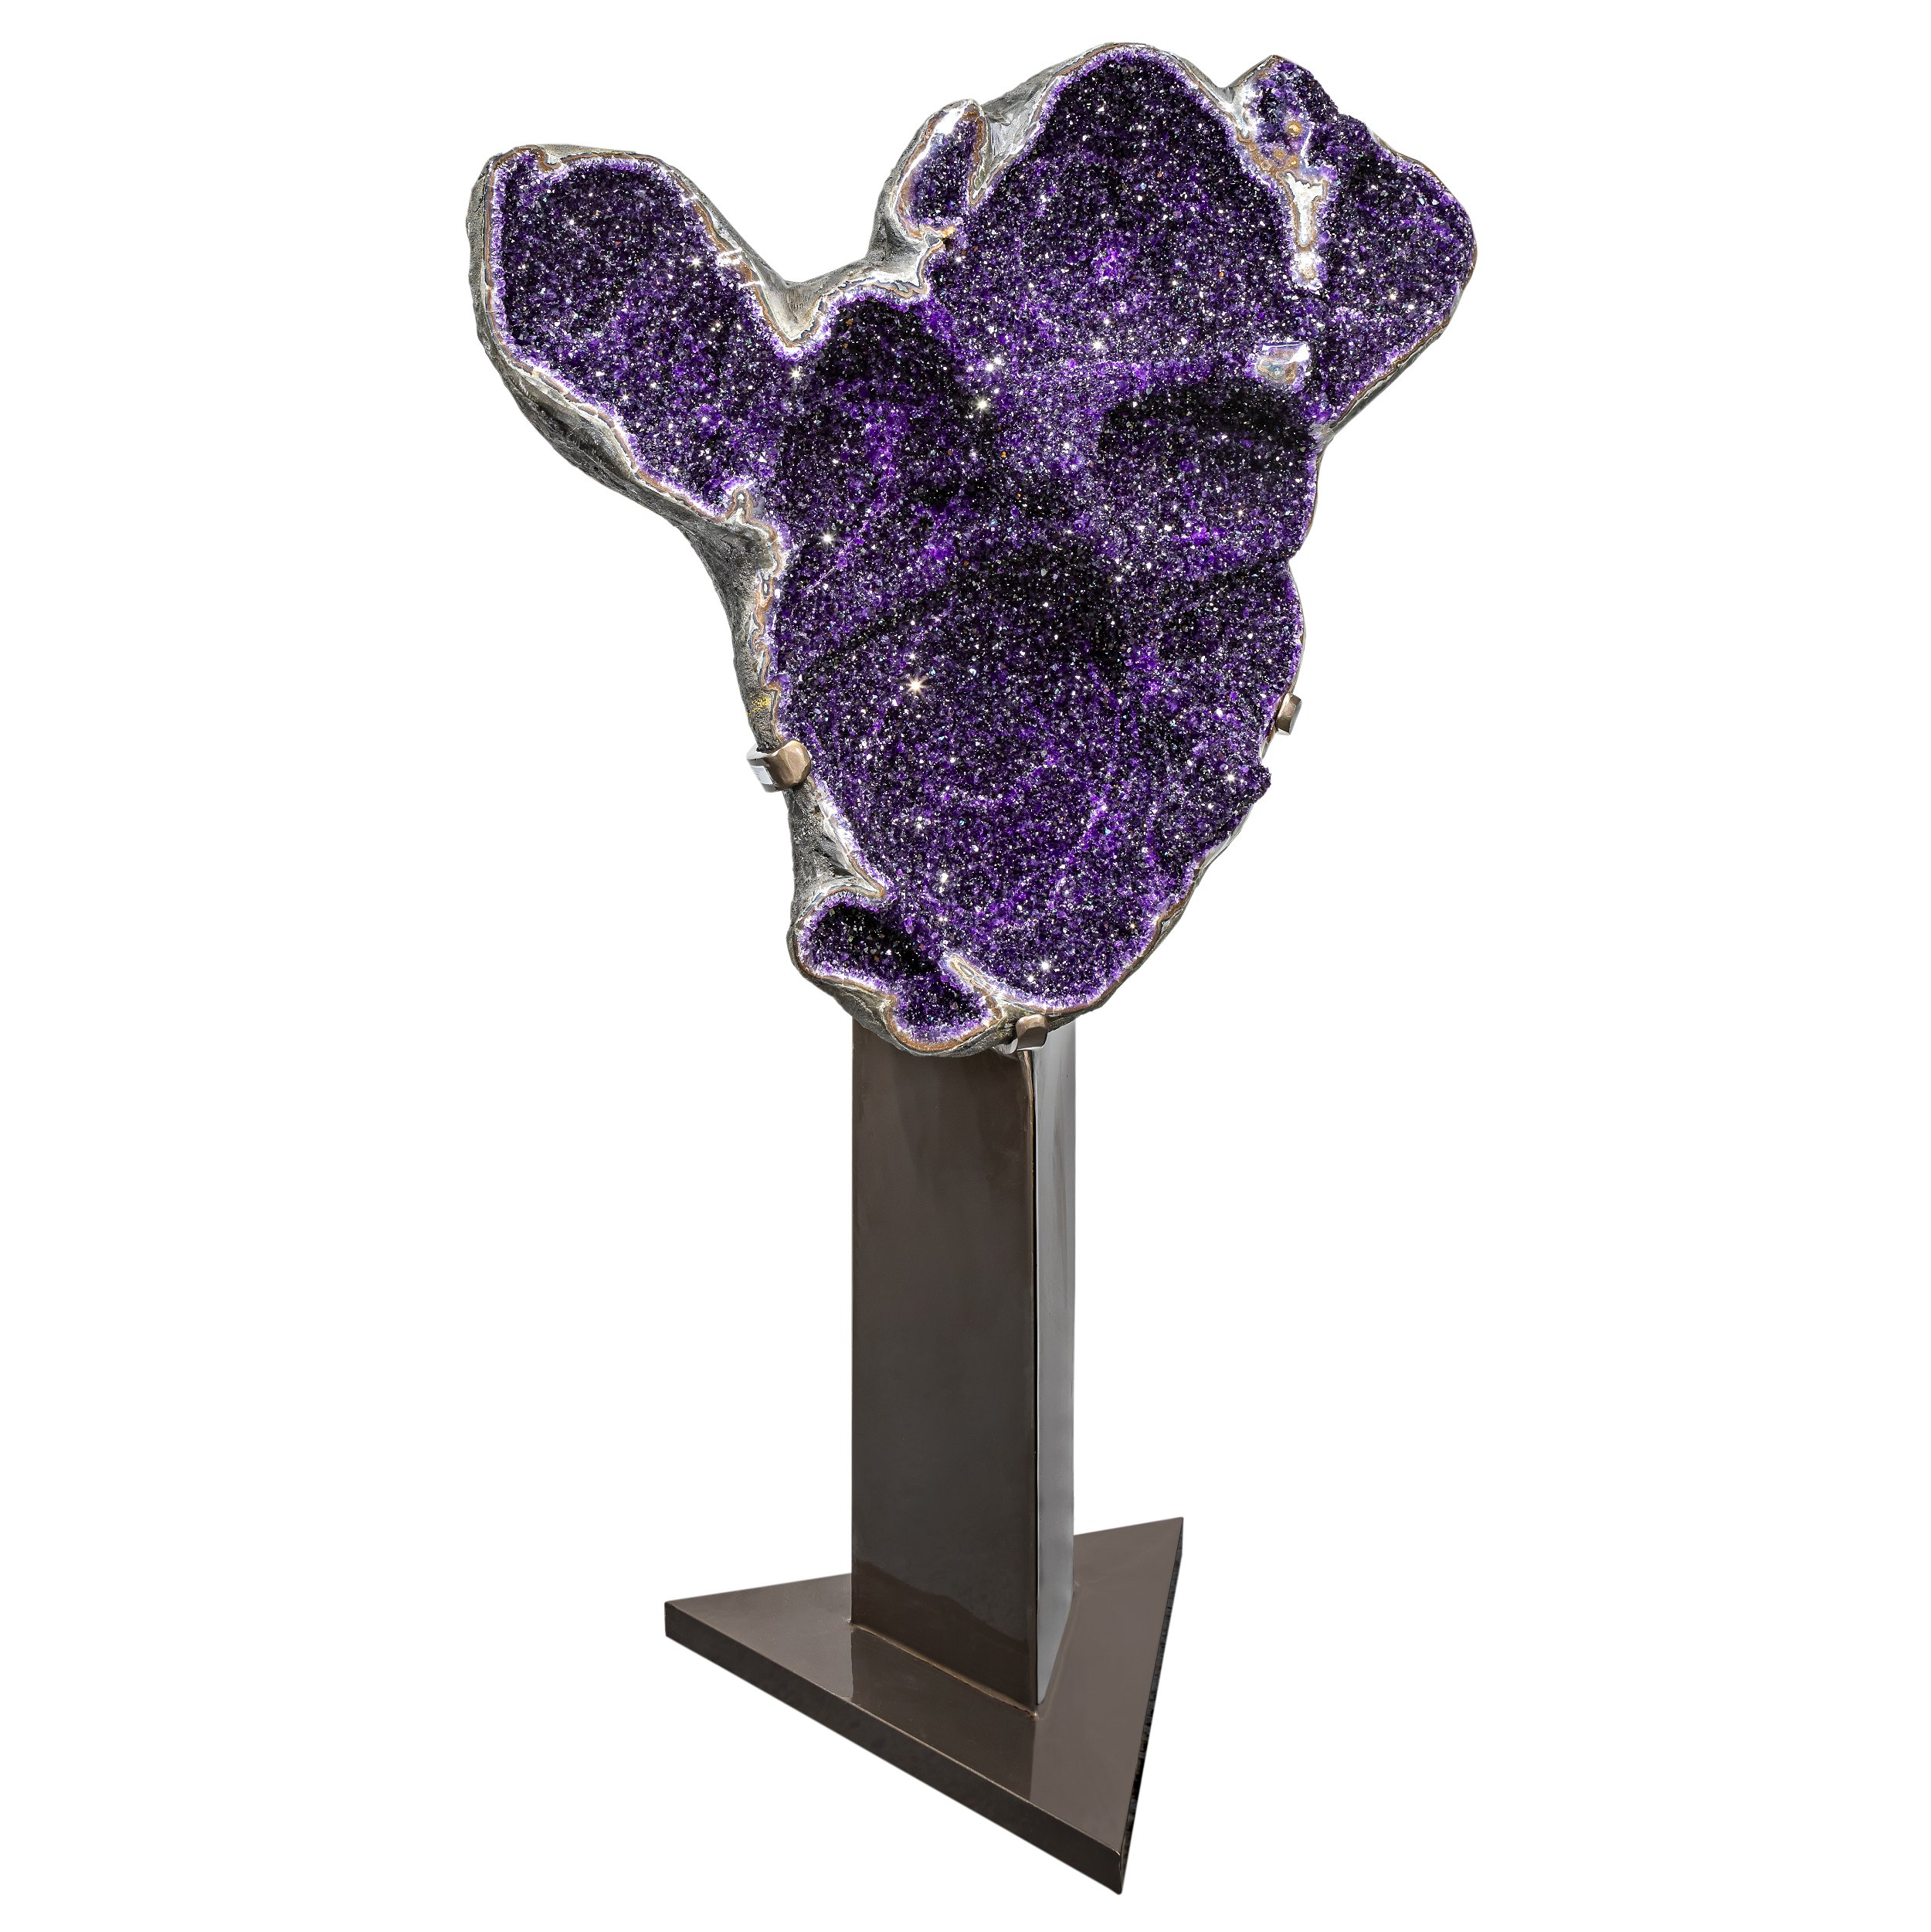 Amethyst Geode On Fitted Stand With Gem Juicy Crystals And Stalactite Protrusions